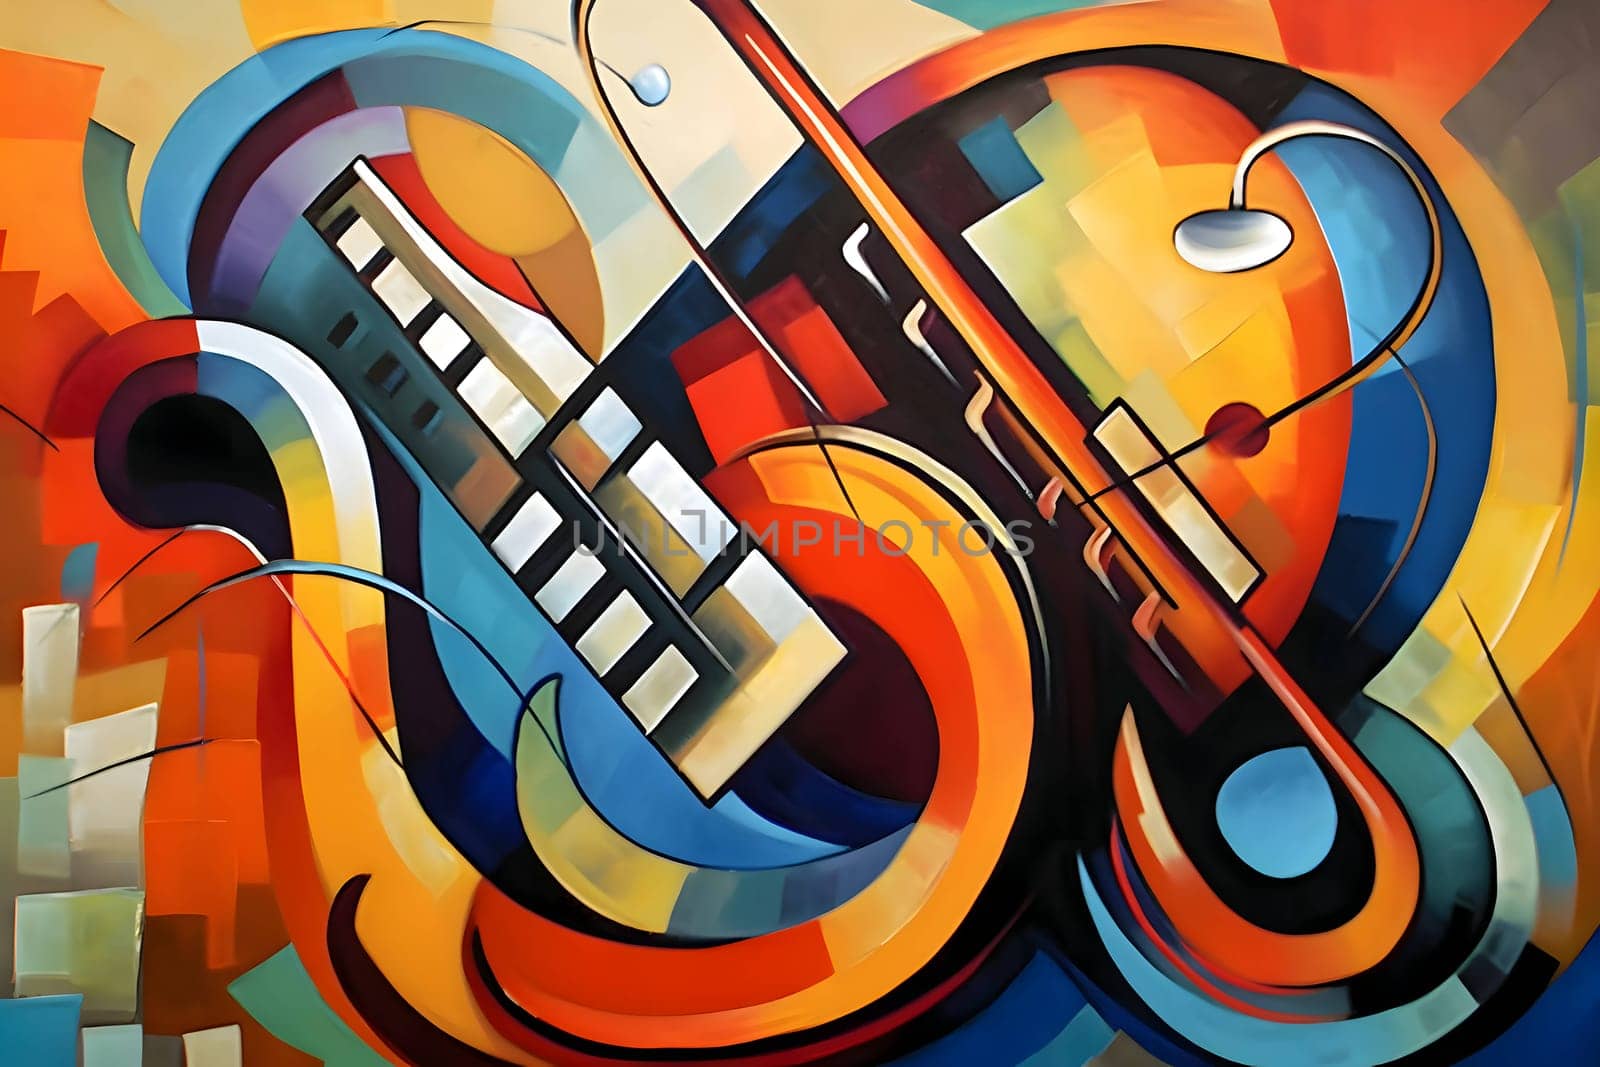 Abstract illustration: abstract color design art illustration with music note in the middle